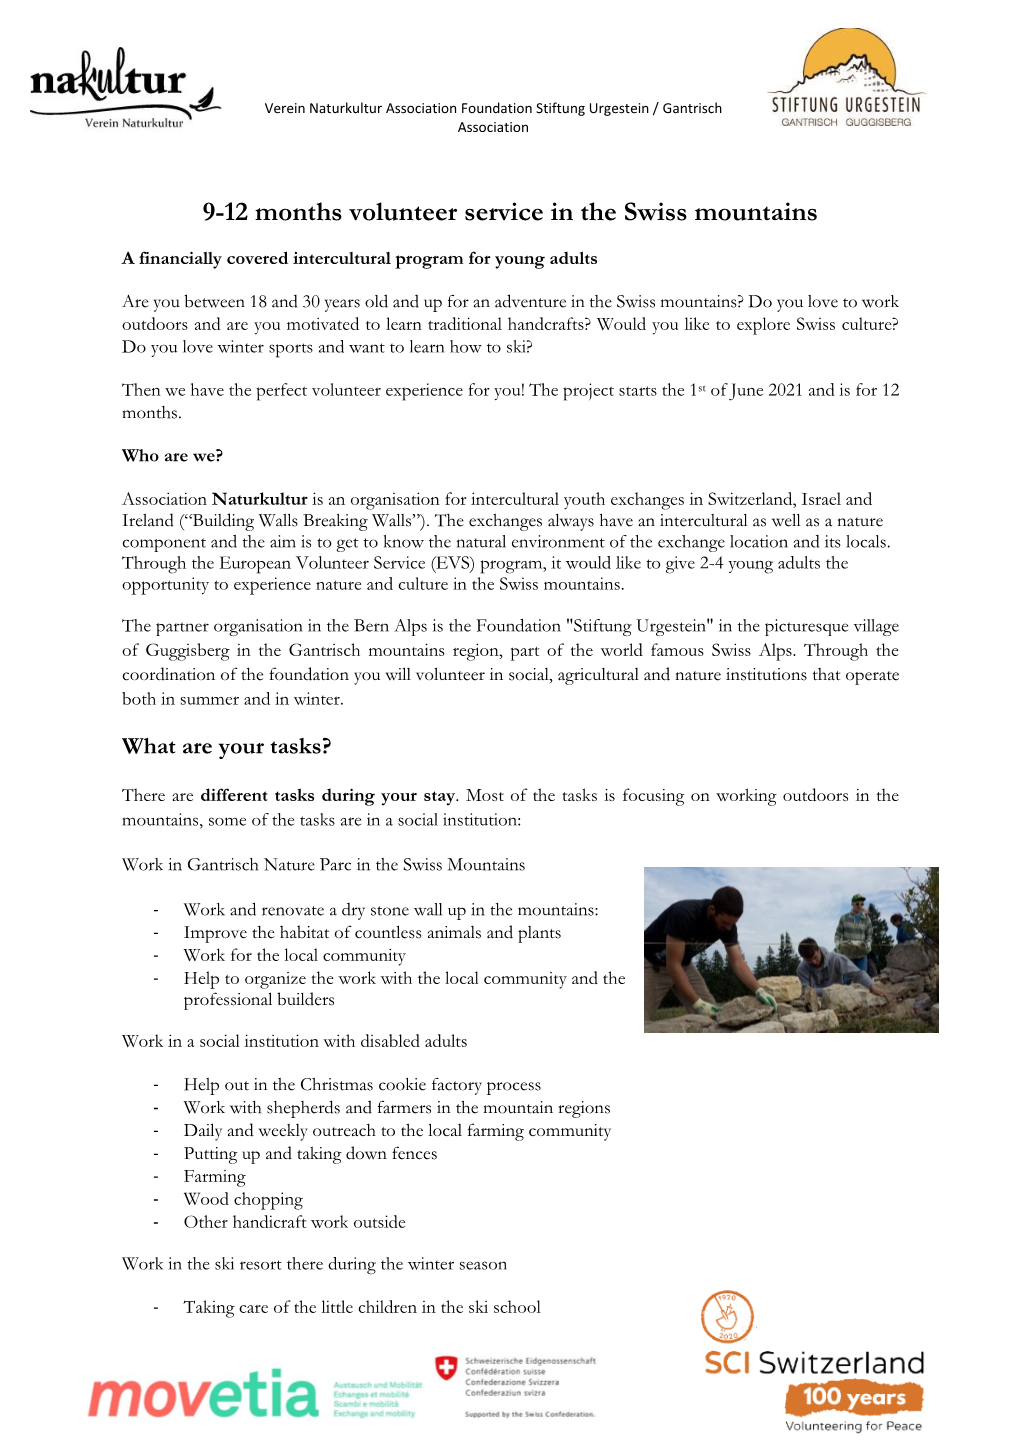 9-12 Months Volunteer Service in the Swiss Mountains